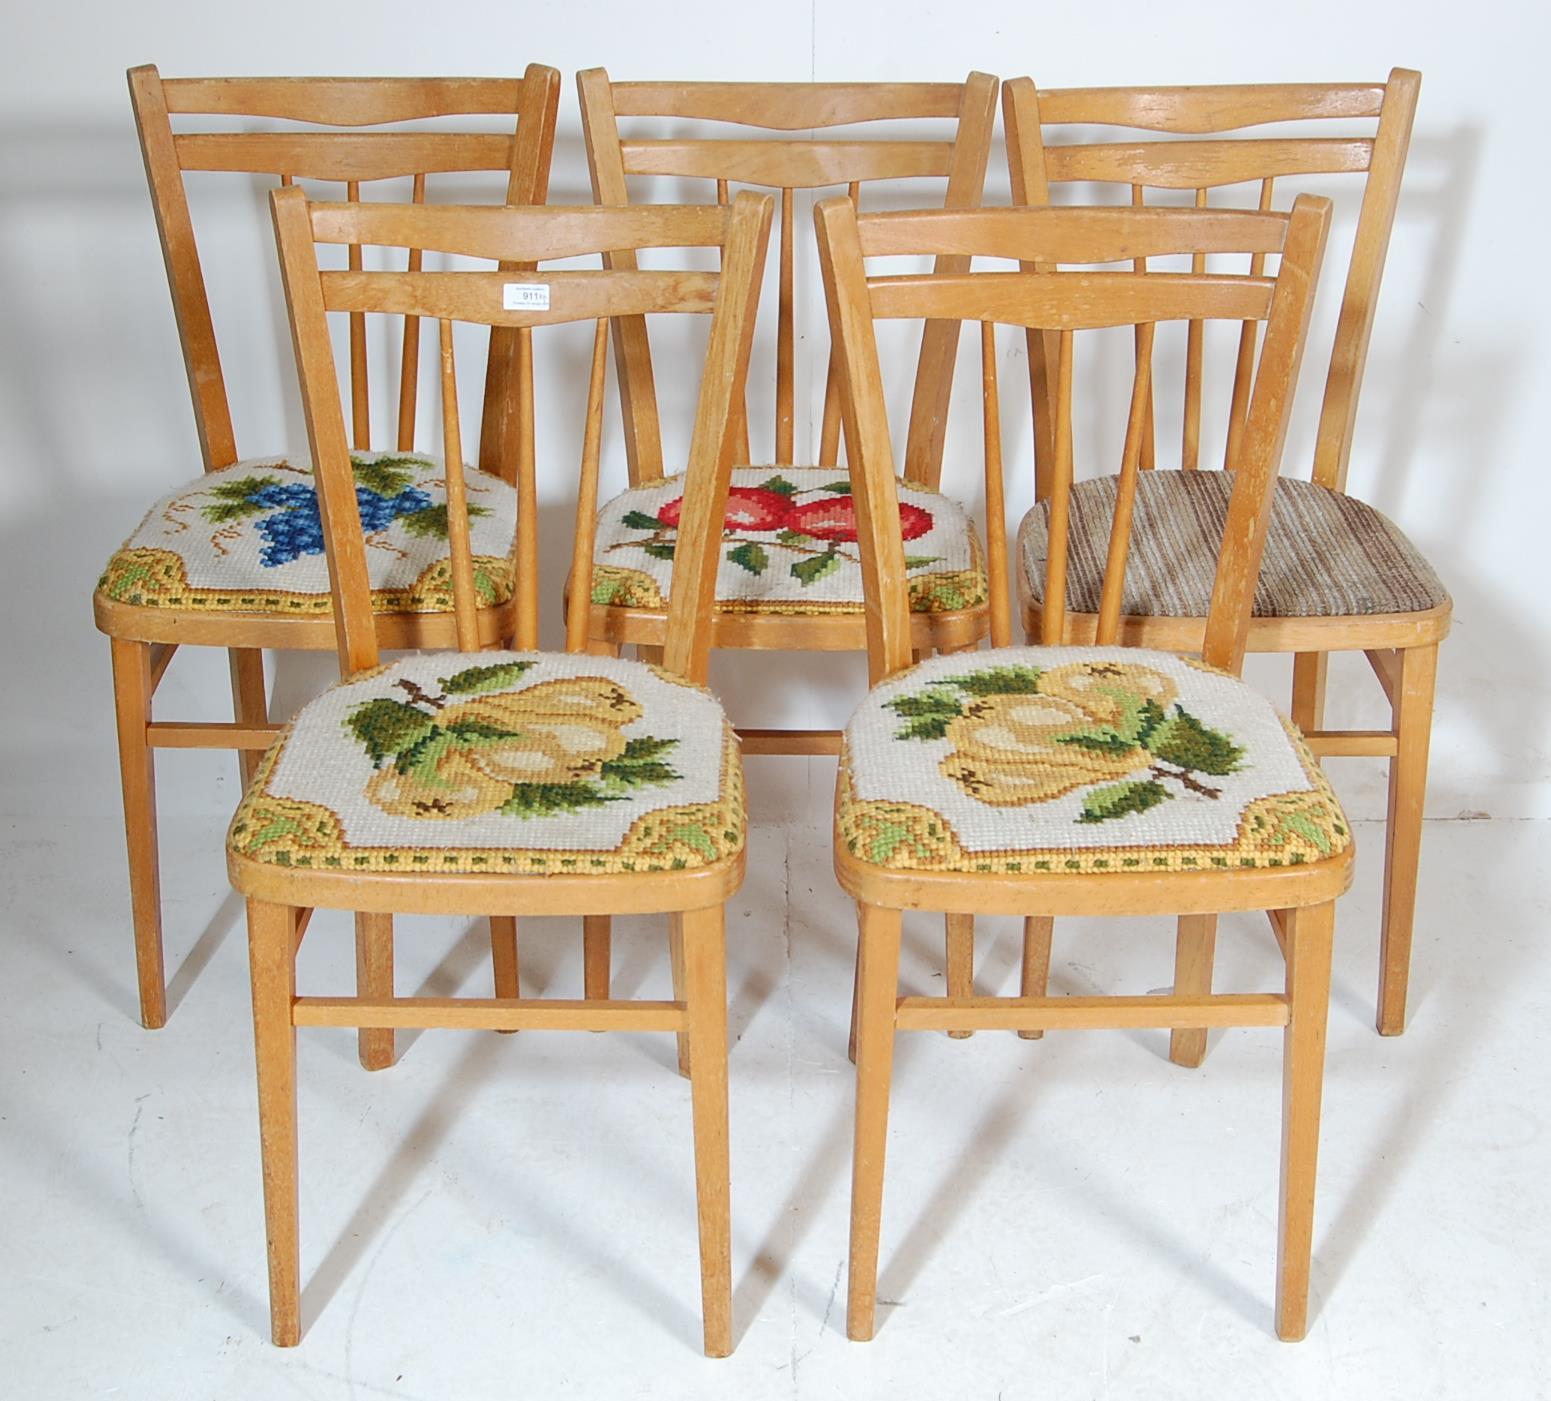 FIVE RETRO 20TH CENTURY DINING CHAIRS / KITCHEN CHAIRS - Image 2 of 5